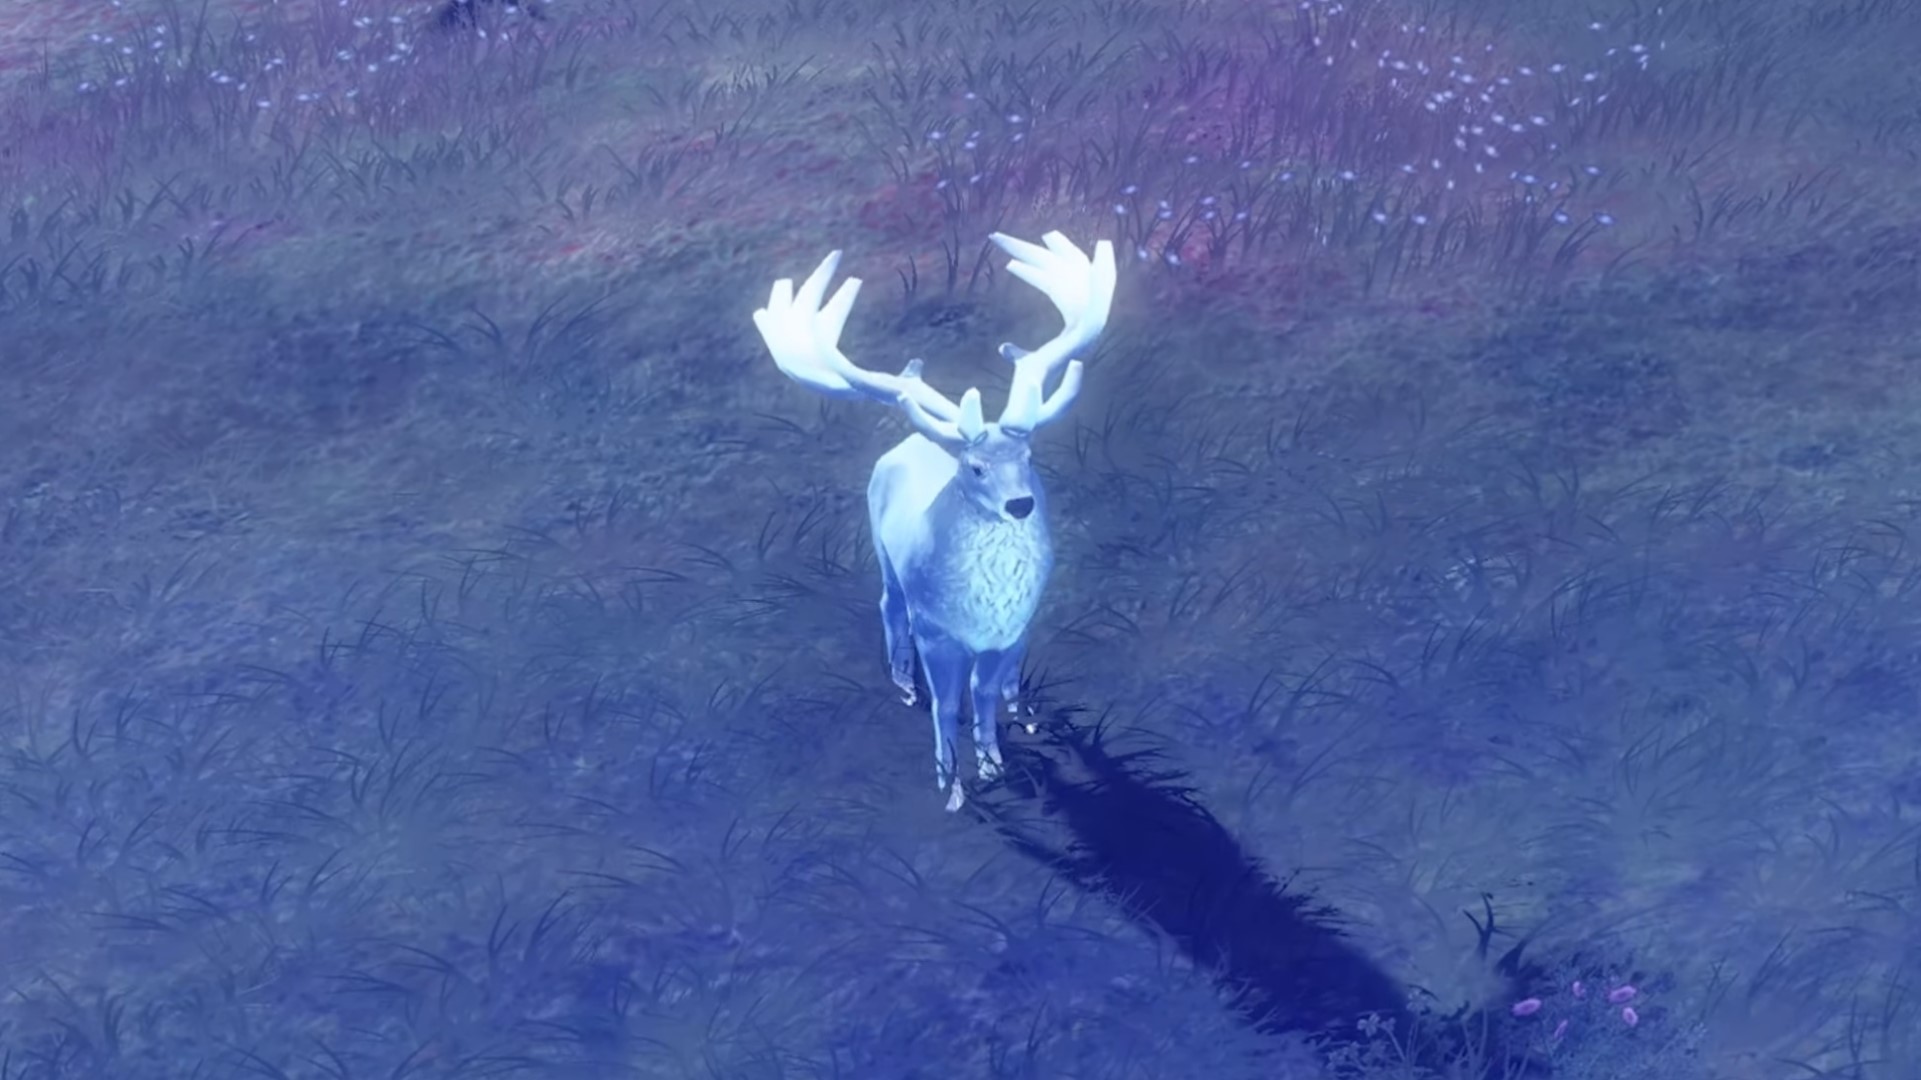 Age of Empires 4 season 4 adds a magic biome and enchanted stag